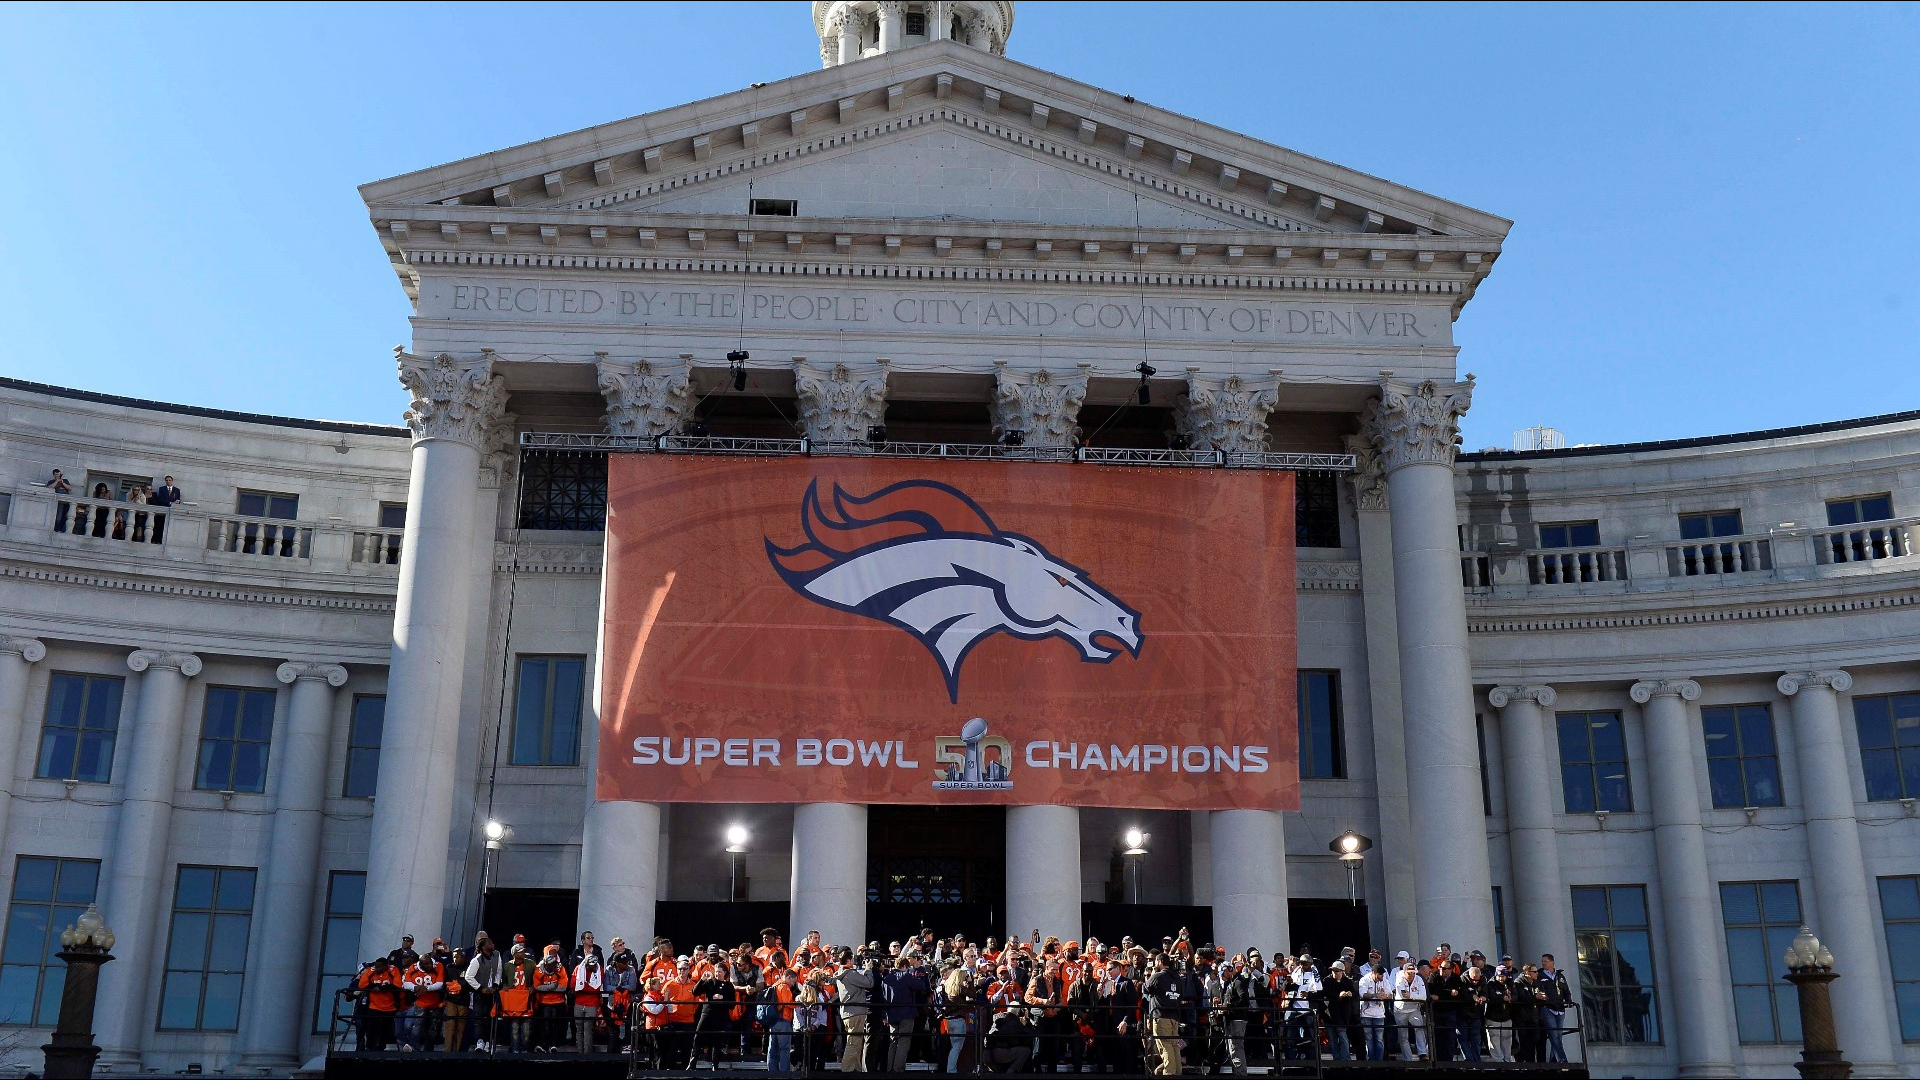 The City of Denver wants to host the NFL Draft. The City of Denver and the Broncos have a history of holding successful large events such as the Super Bowl L Parade and the NFL Kickoff Concert in 2016.